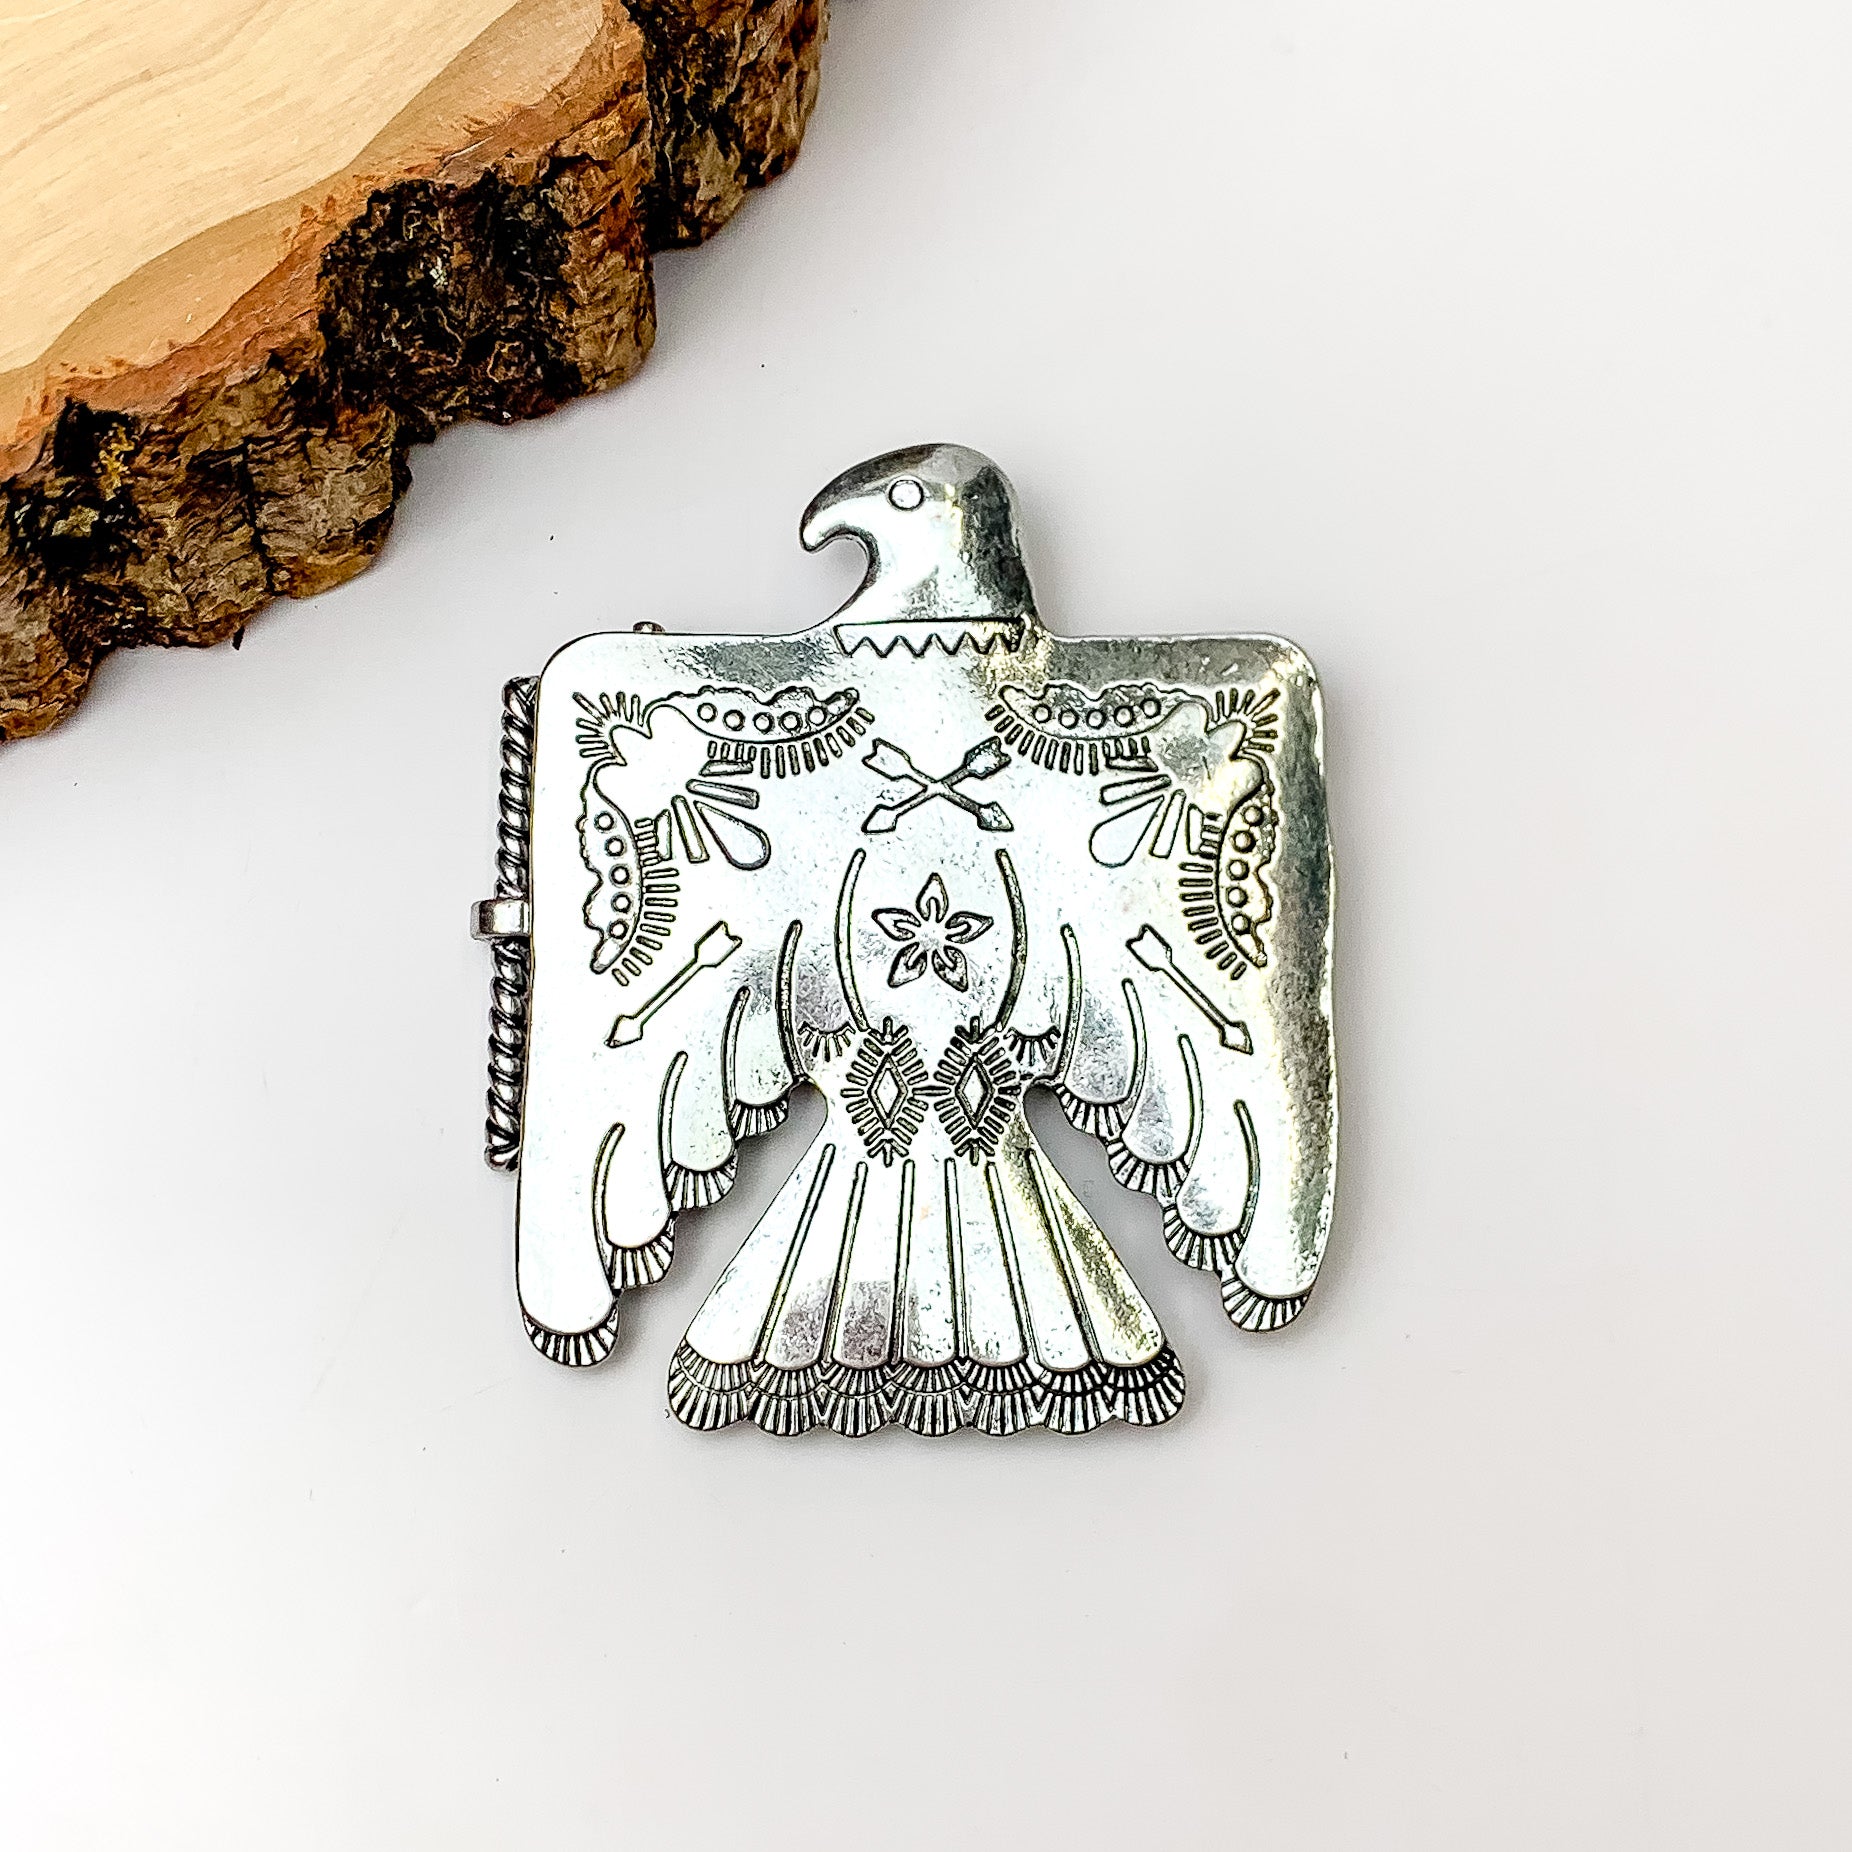 Free Bird Belt Buckle in Silver Tone. Pictured on a white background with a wood piece in the top left corner.